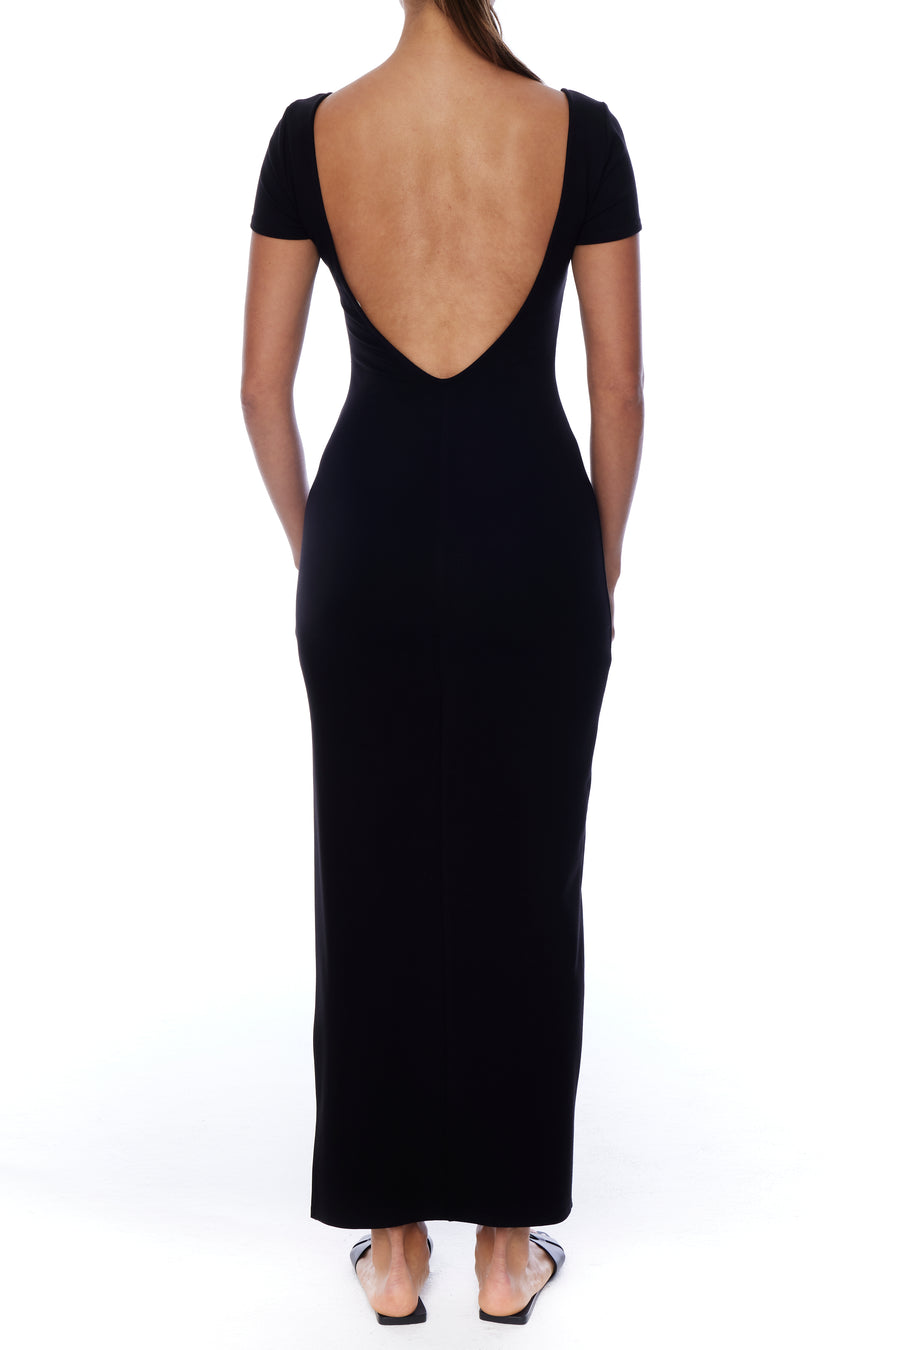 midi-length, open back dress by LBLC the label with short sleeves, scoop neck and side slit - back 